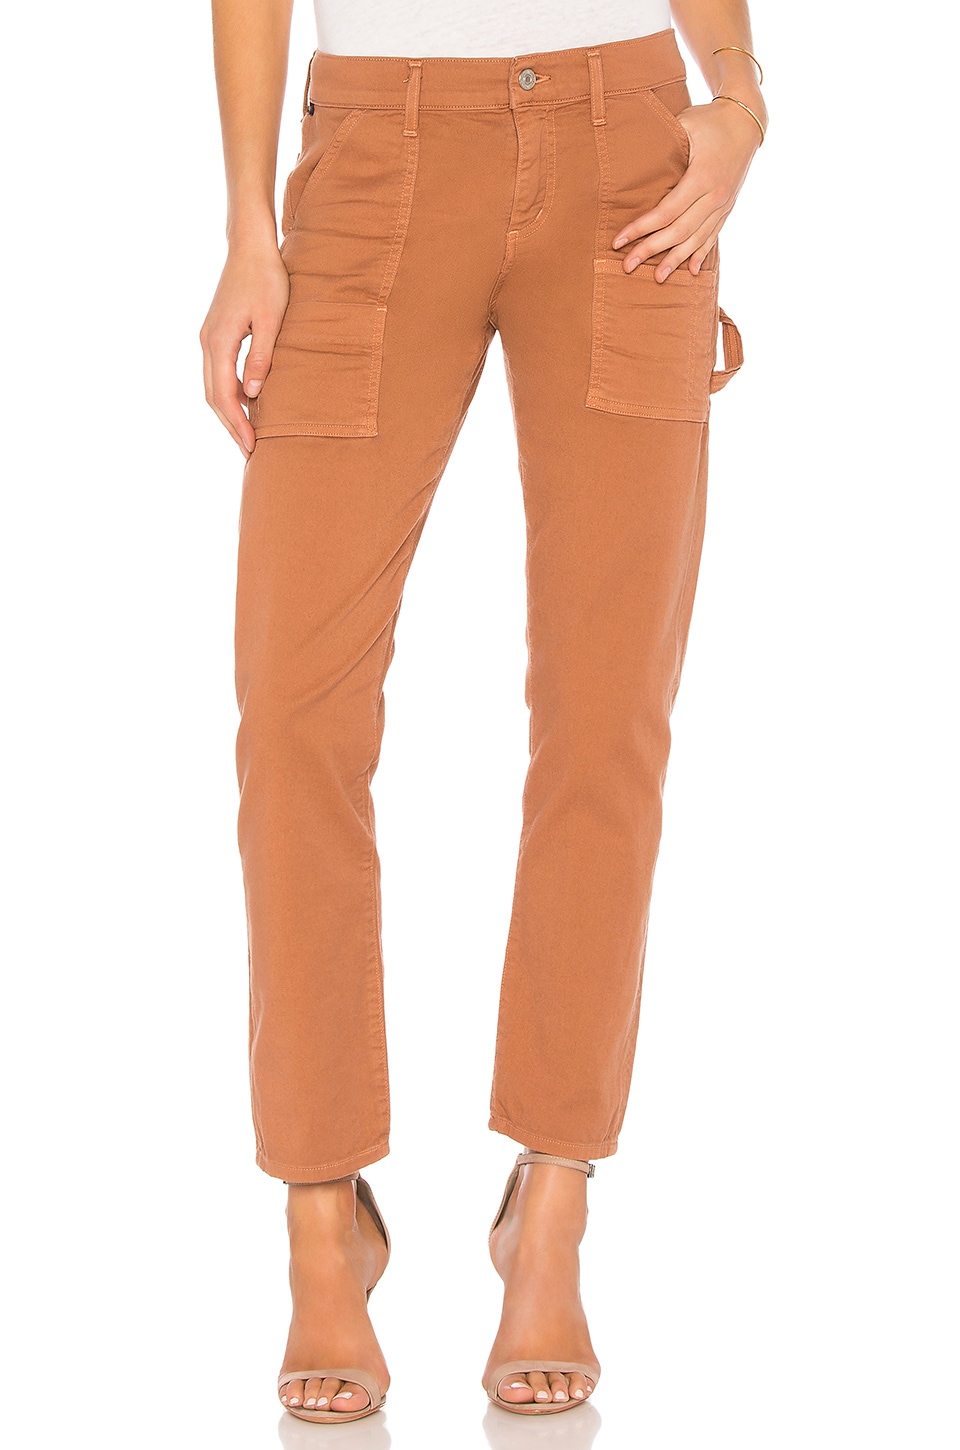 citizens of humanity cargo pants